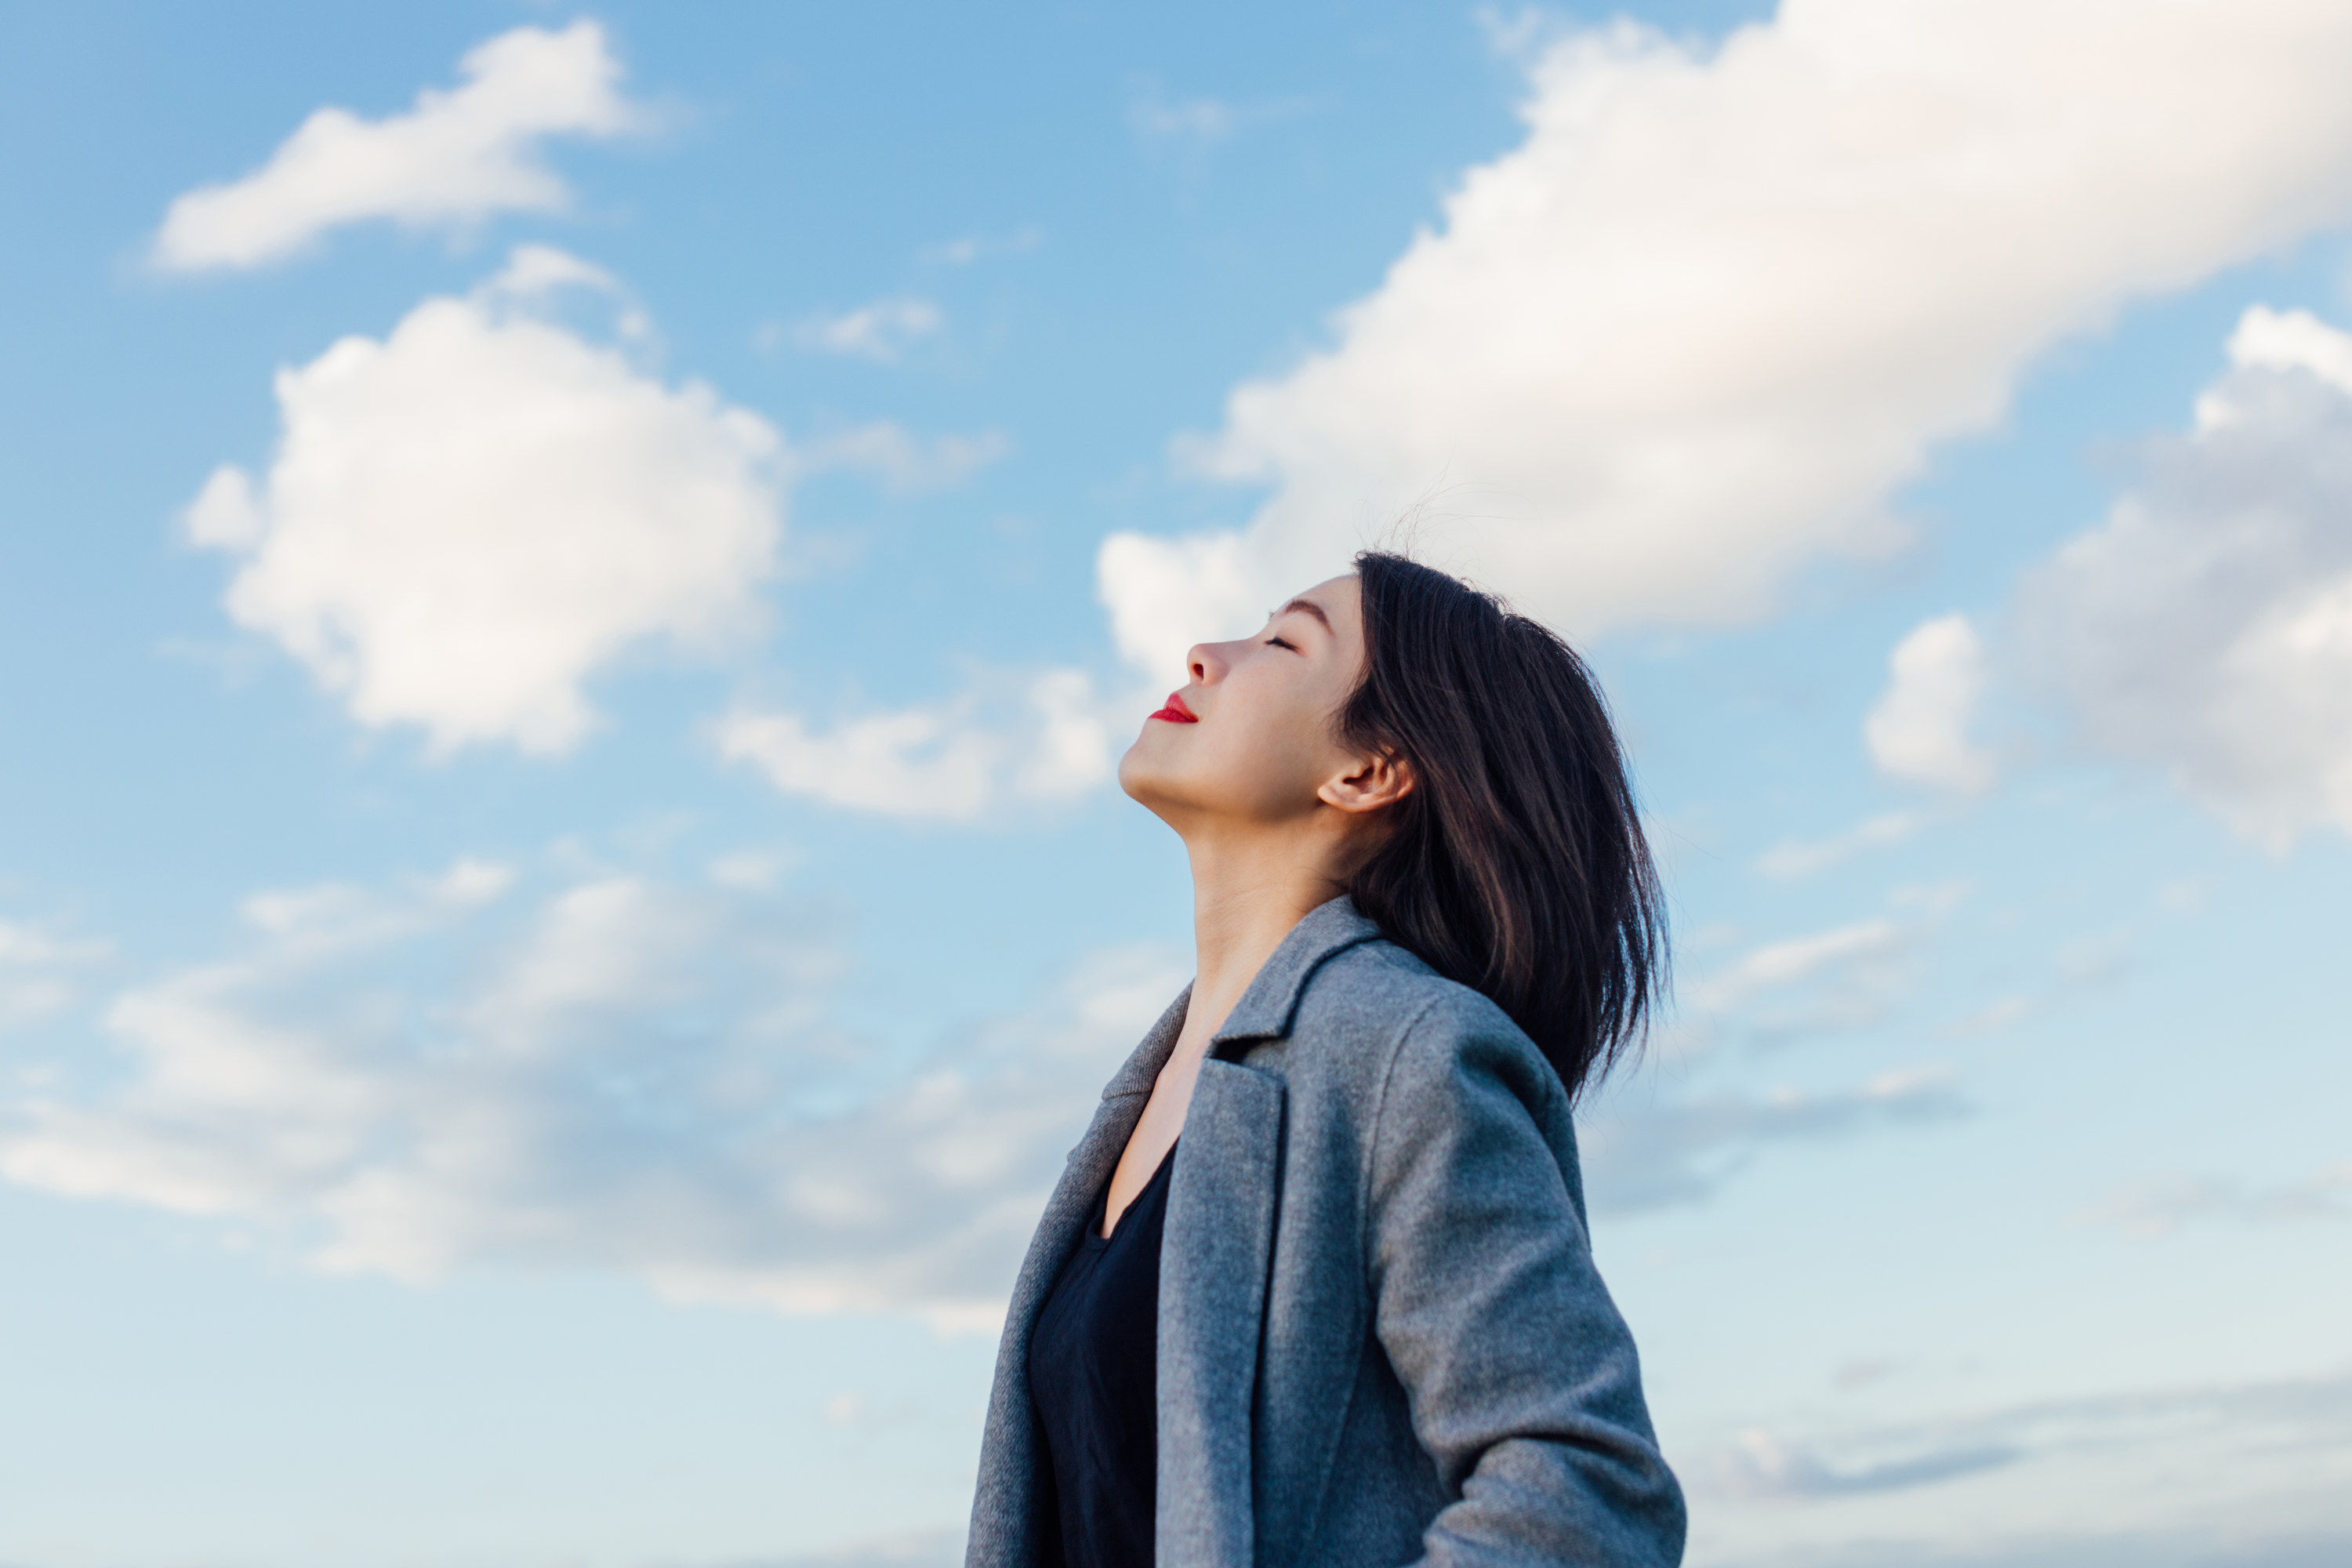 An image of a woman looking up to the clouds in the sky